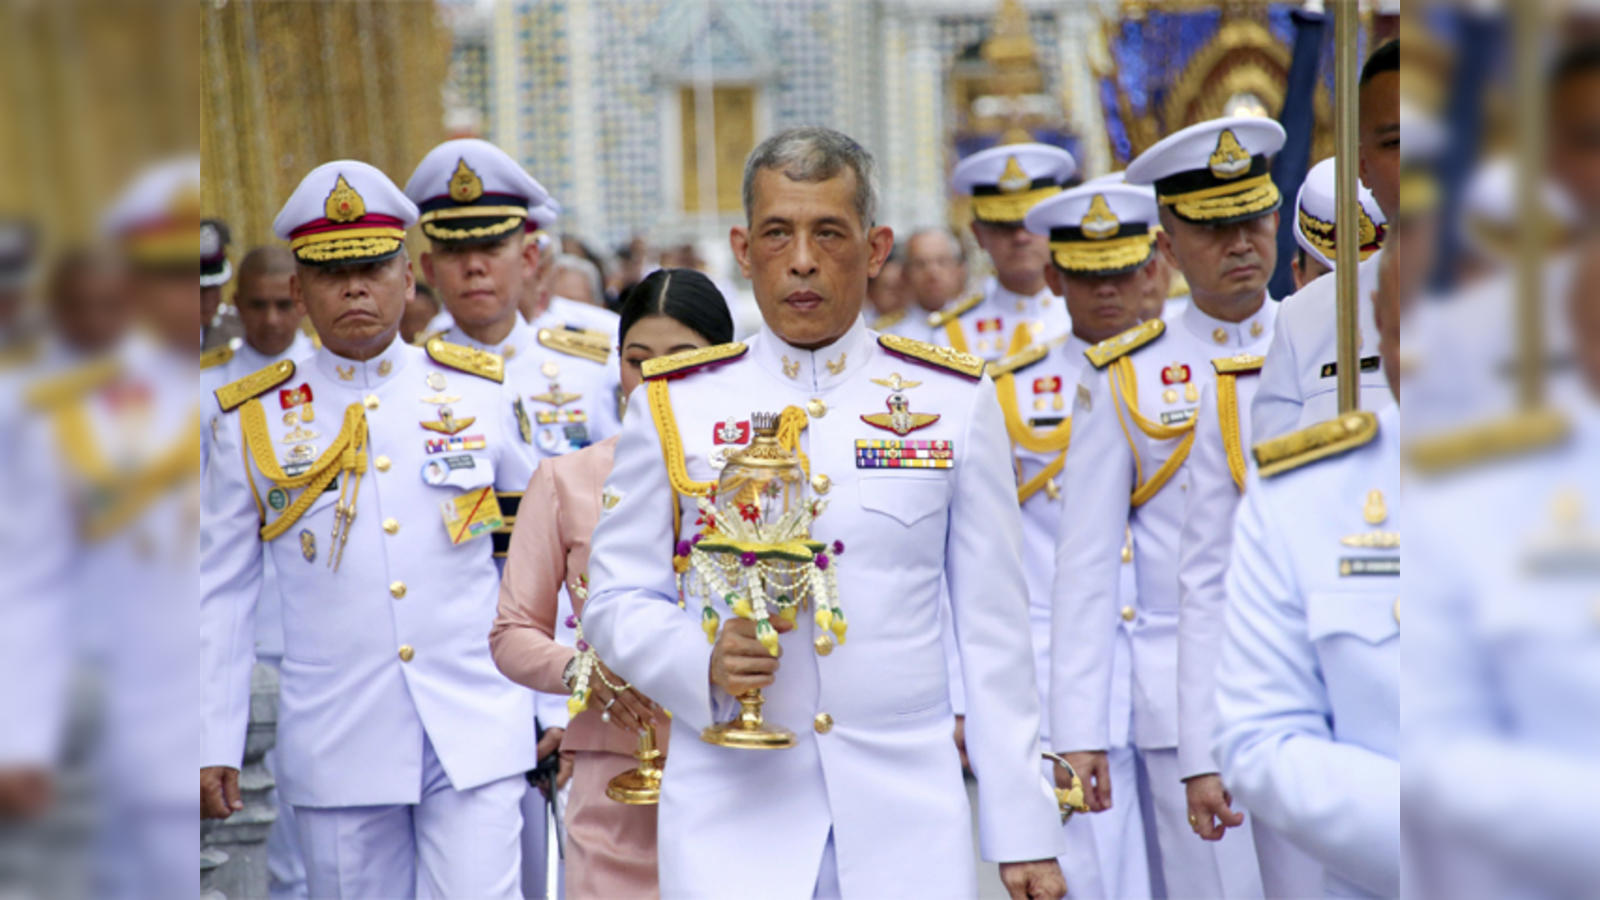 Everything We Know About Thailand's King Maha Vajiralongkorn